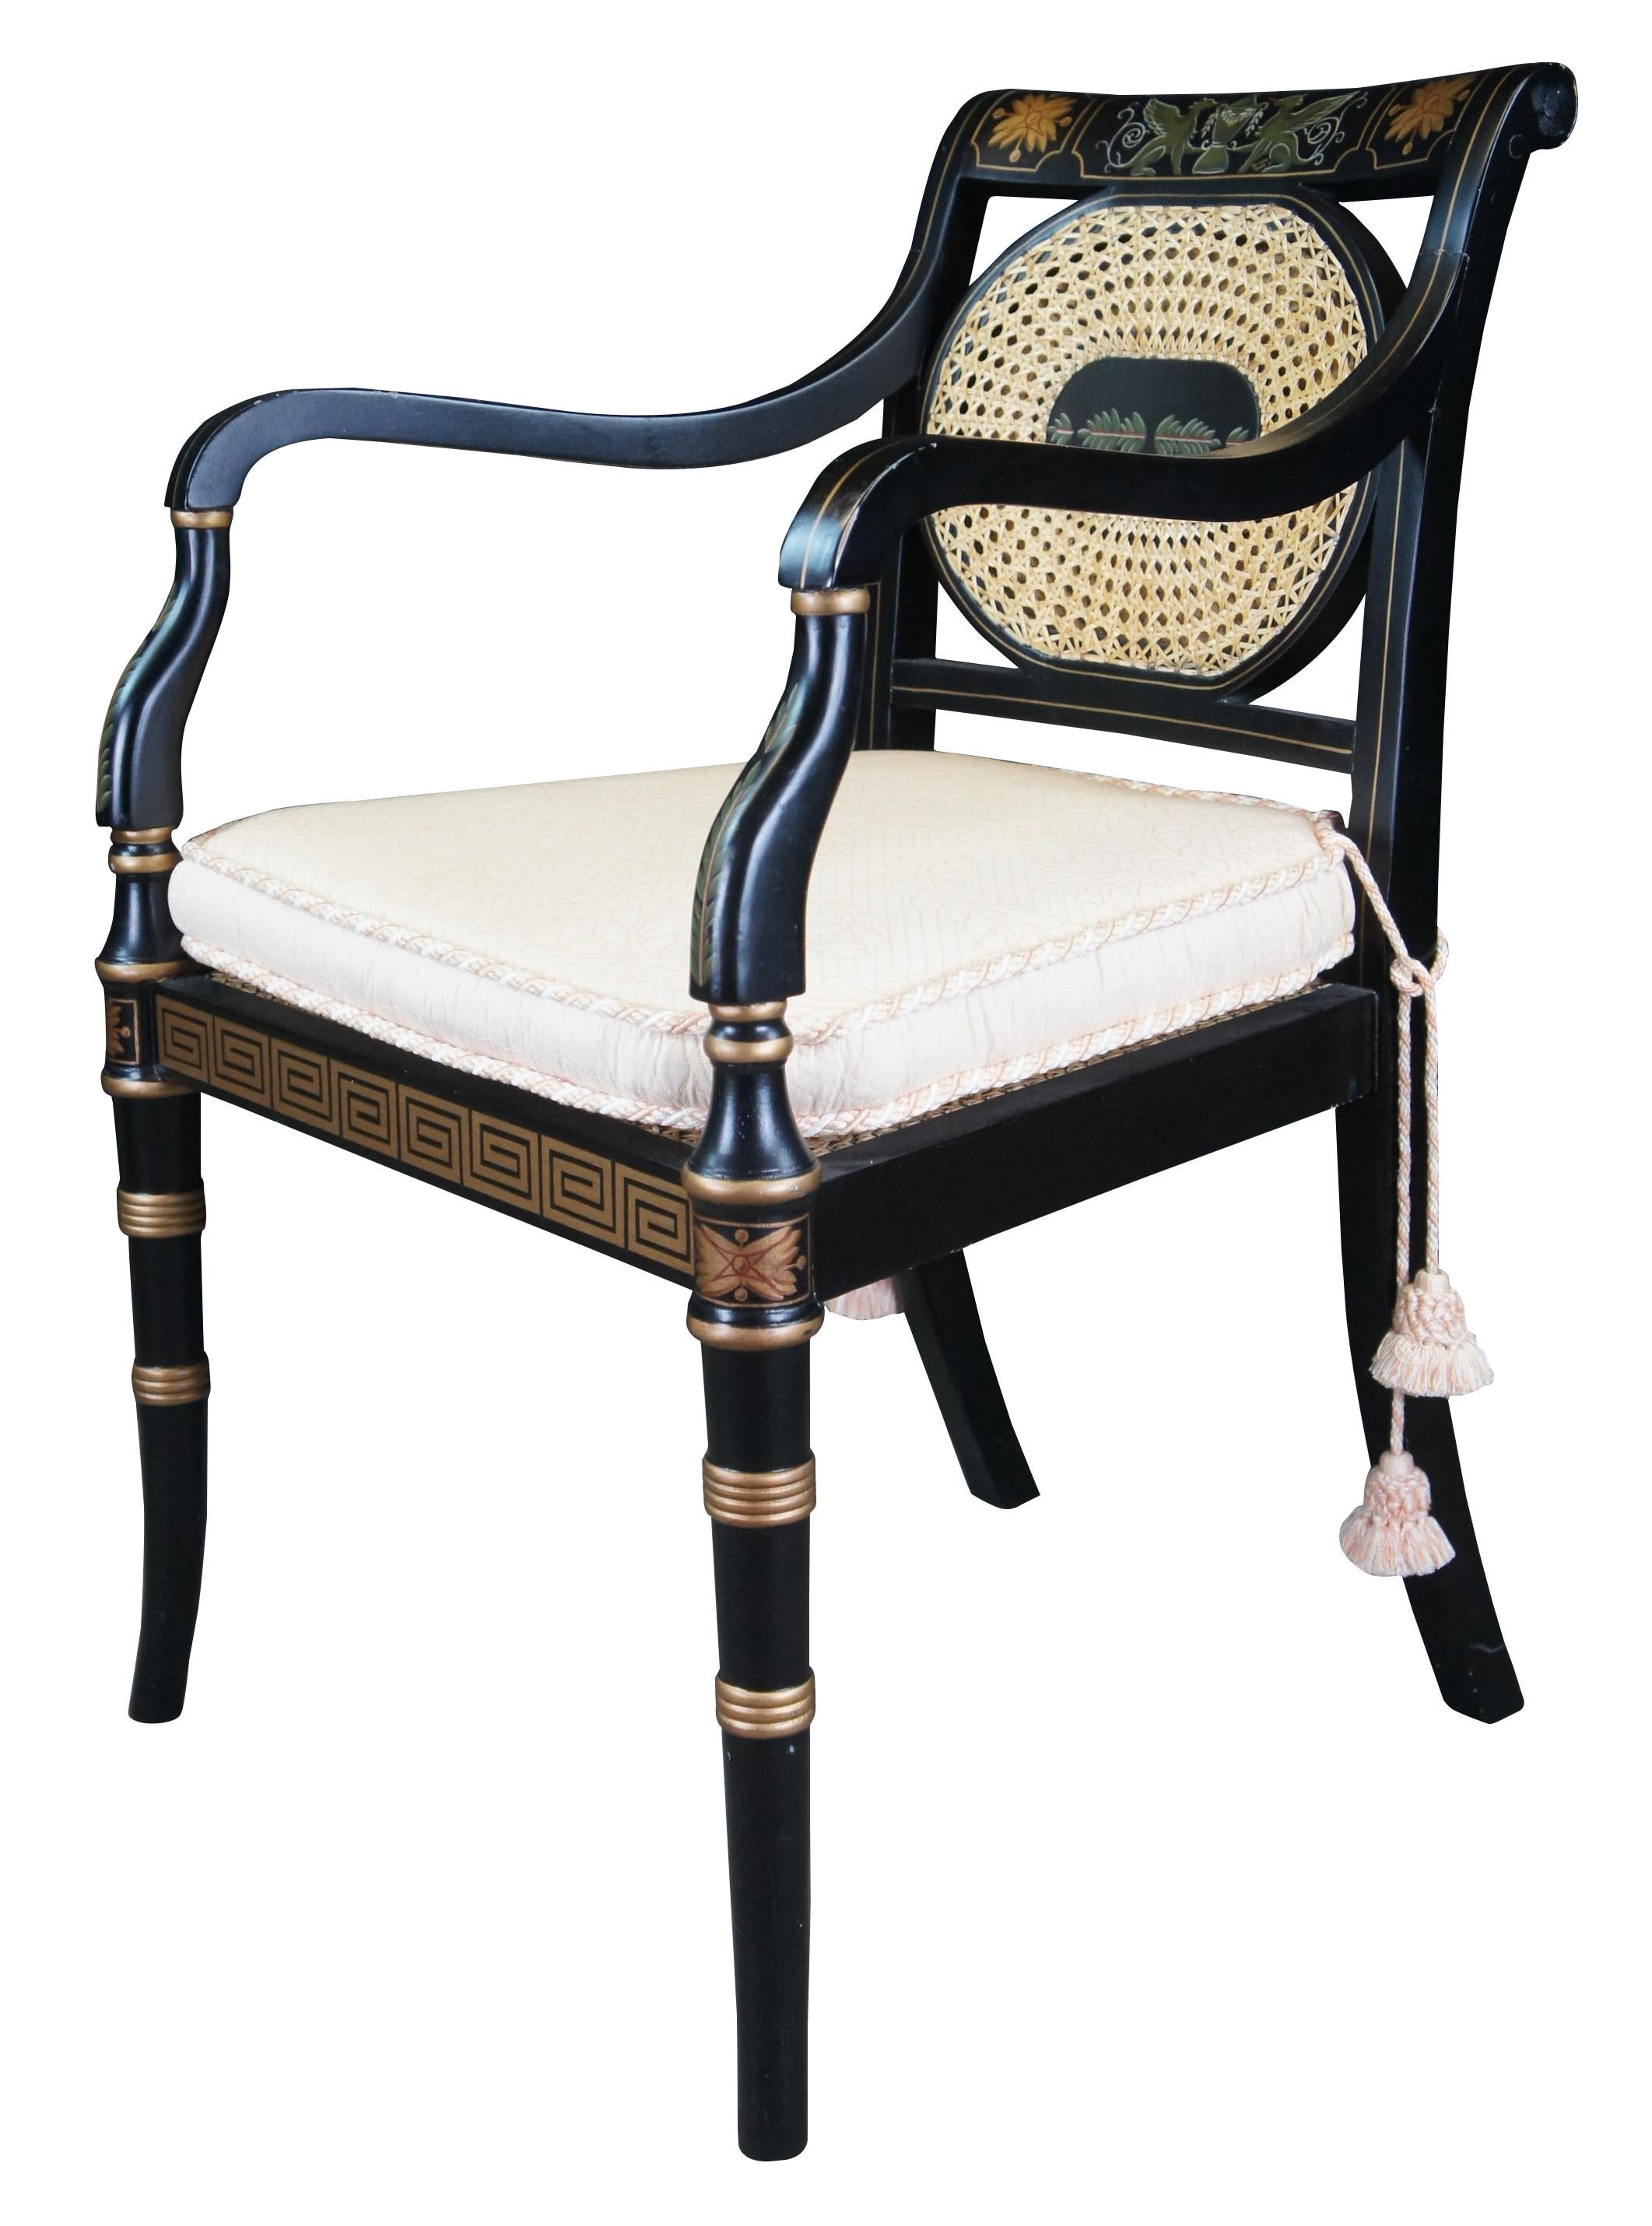 Vintage English Regency Black Lacquer & Gold Painted Occasional Caned Arm Chair In Good Condition For Sale In Dayton, OH